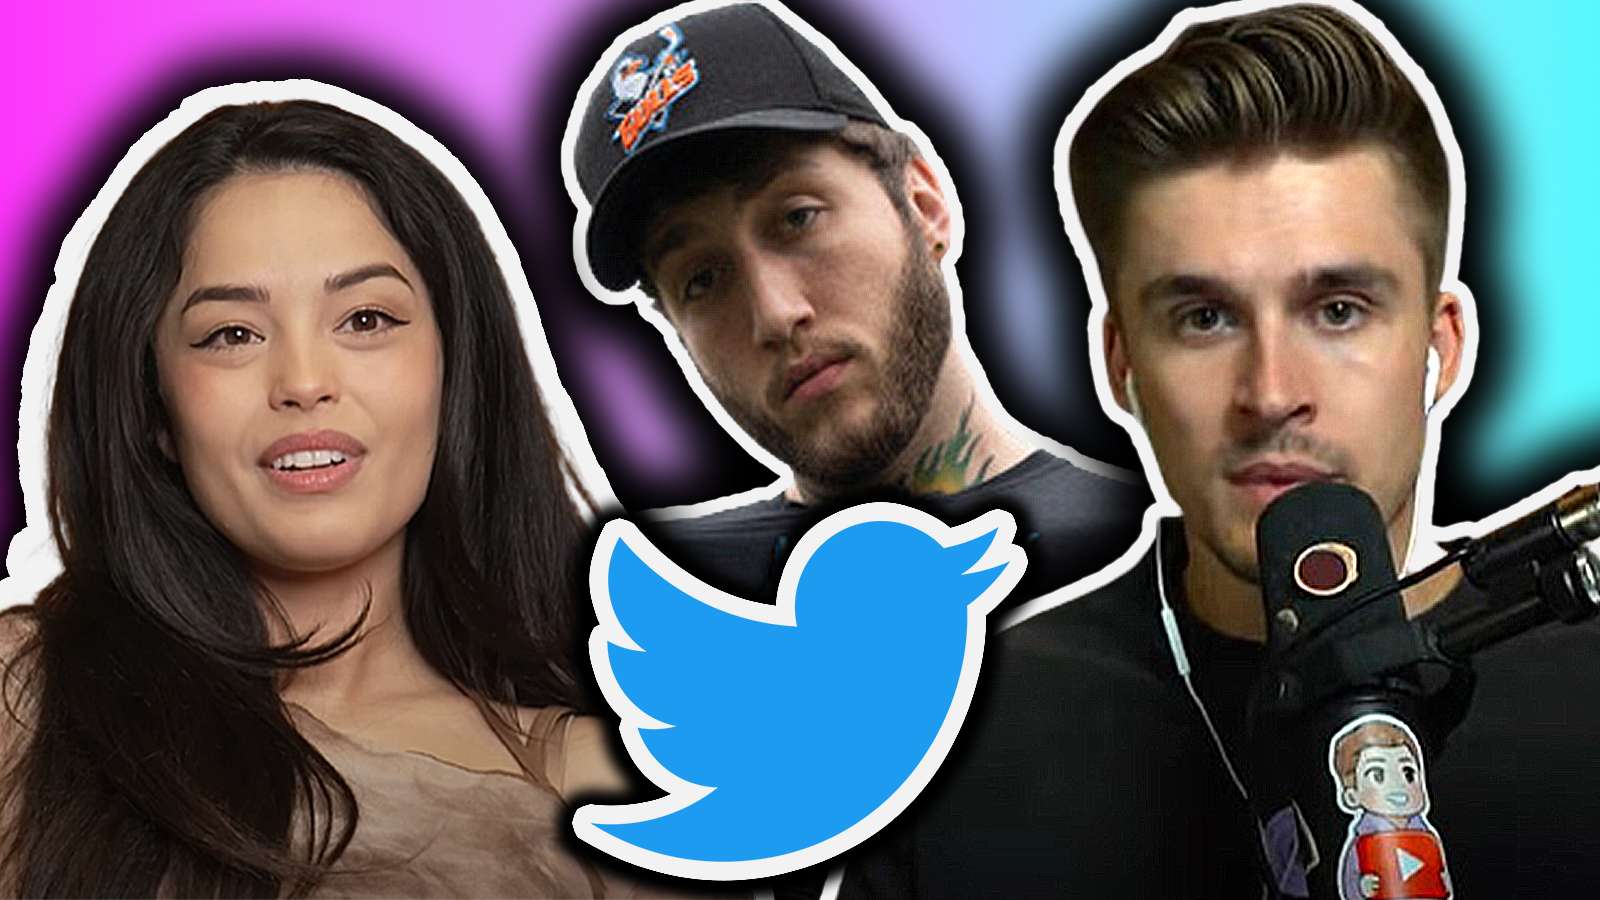 Valkyrae Ludwig Banks and more influencers speak out against Elon Musk twitter changes